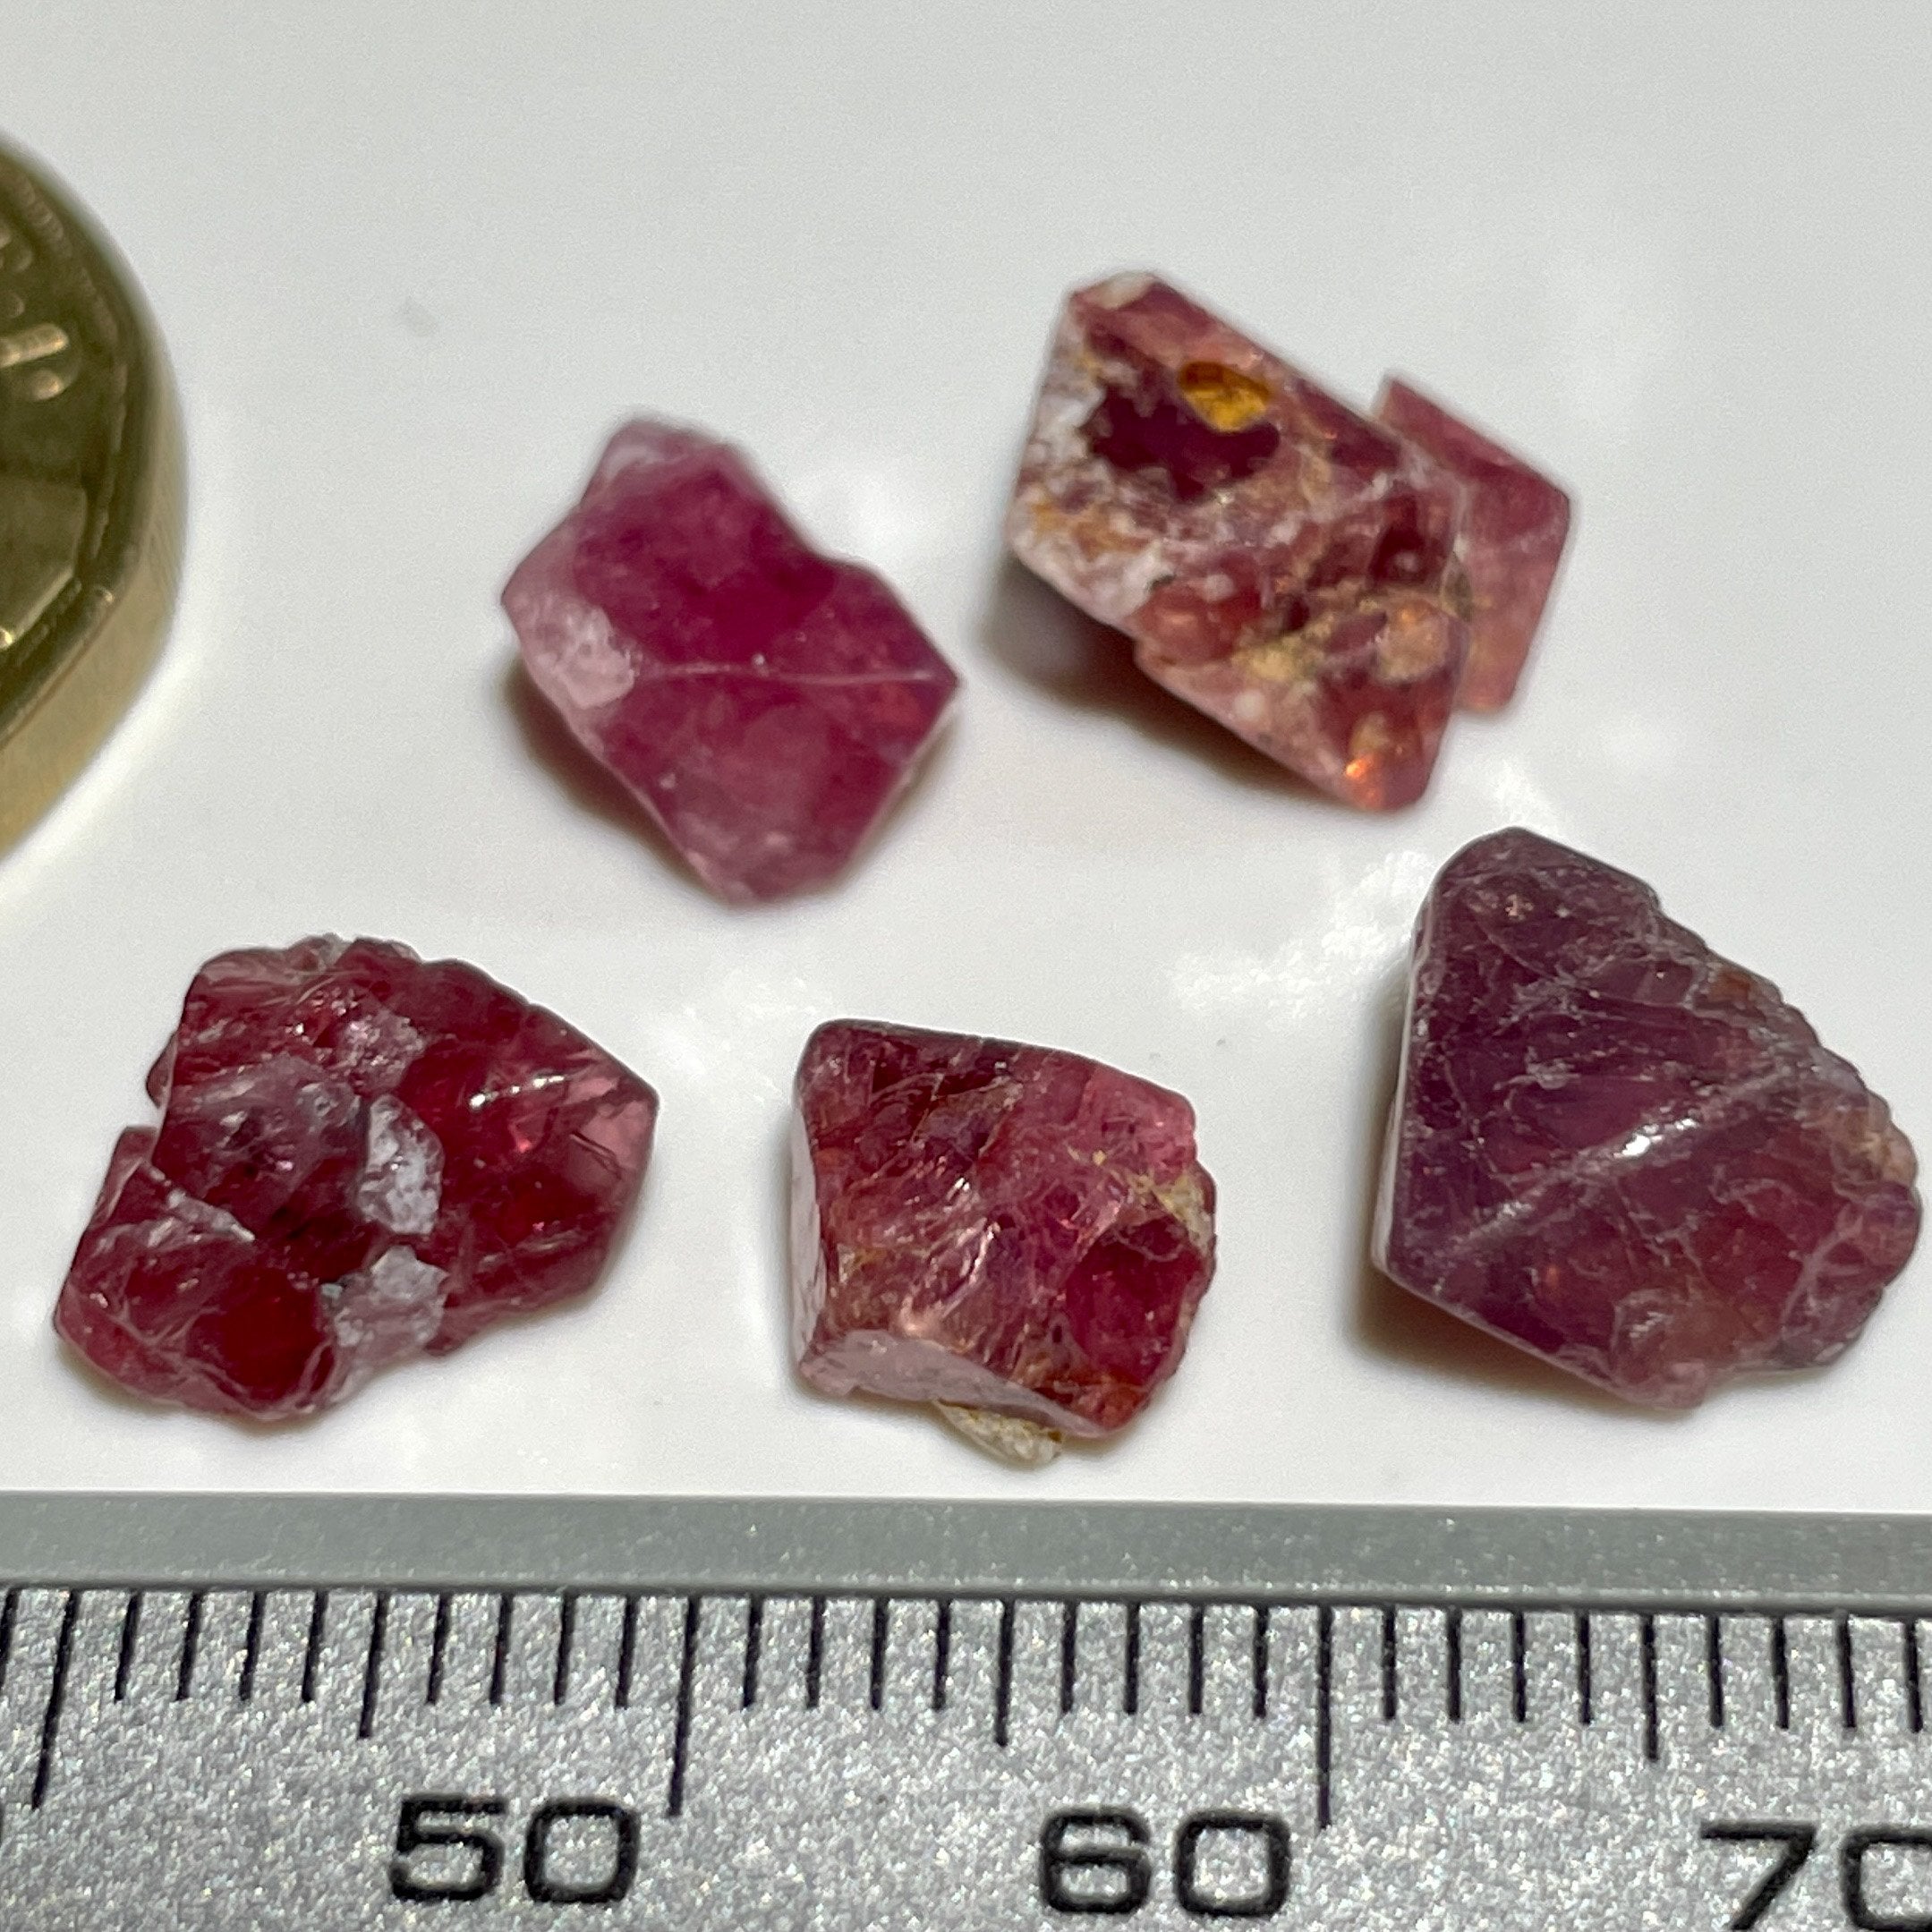 21.22Ct Mahenge Spinel Crystal Lot 3.06Ct - 5.06Ct Tanzania. Untreated Unheated. Good For Setting In